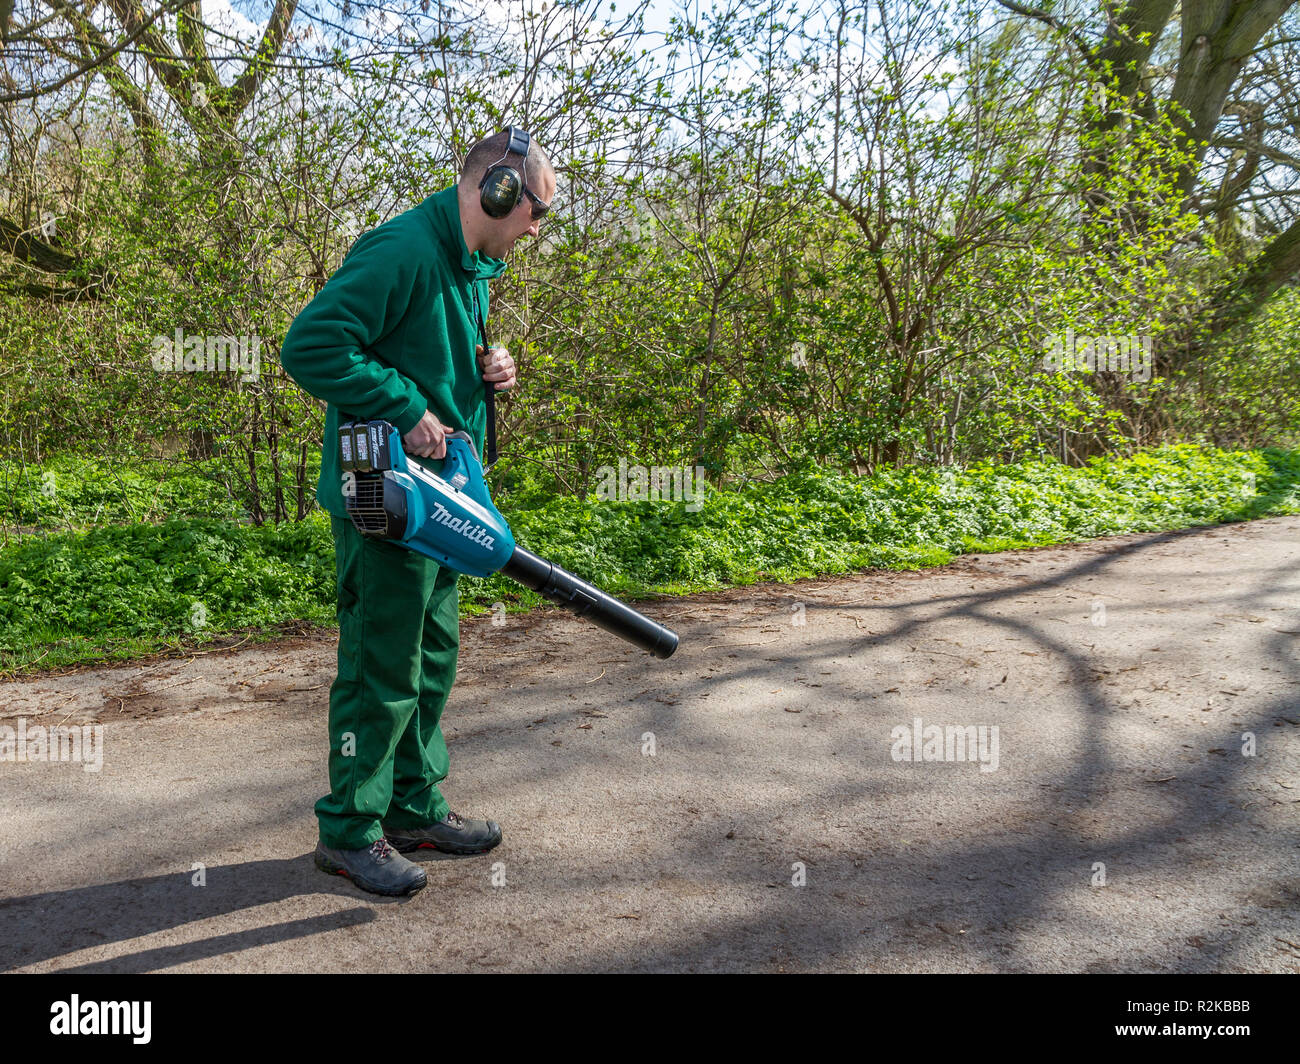 Makita battery powered leaf blower used by Hackney, London, Parks Dept. Stock Photo